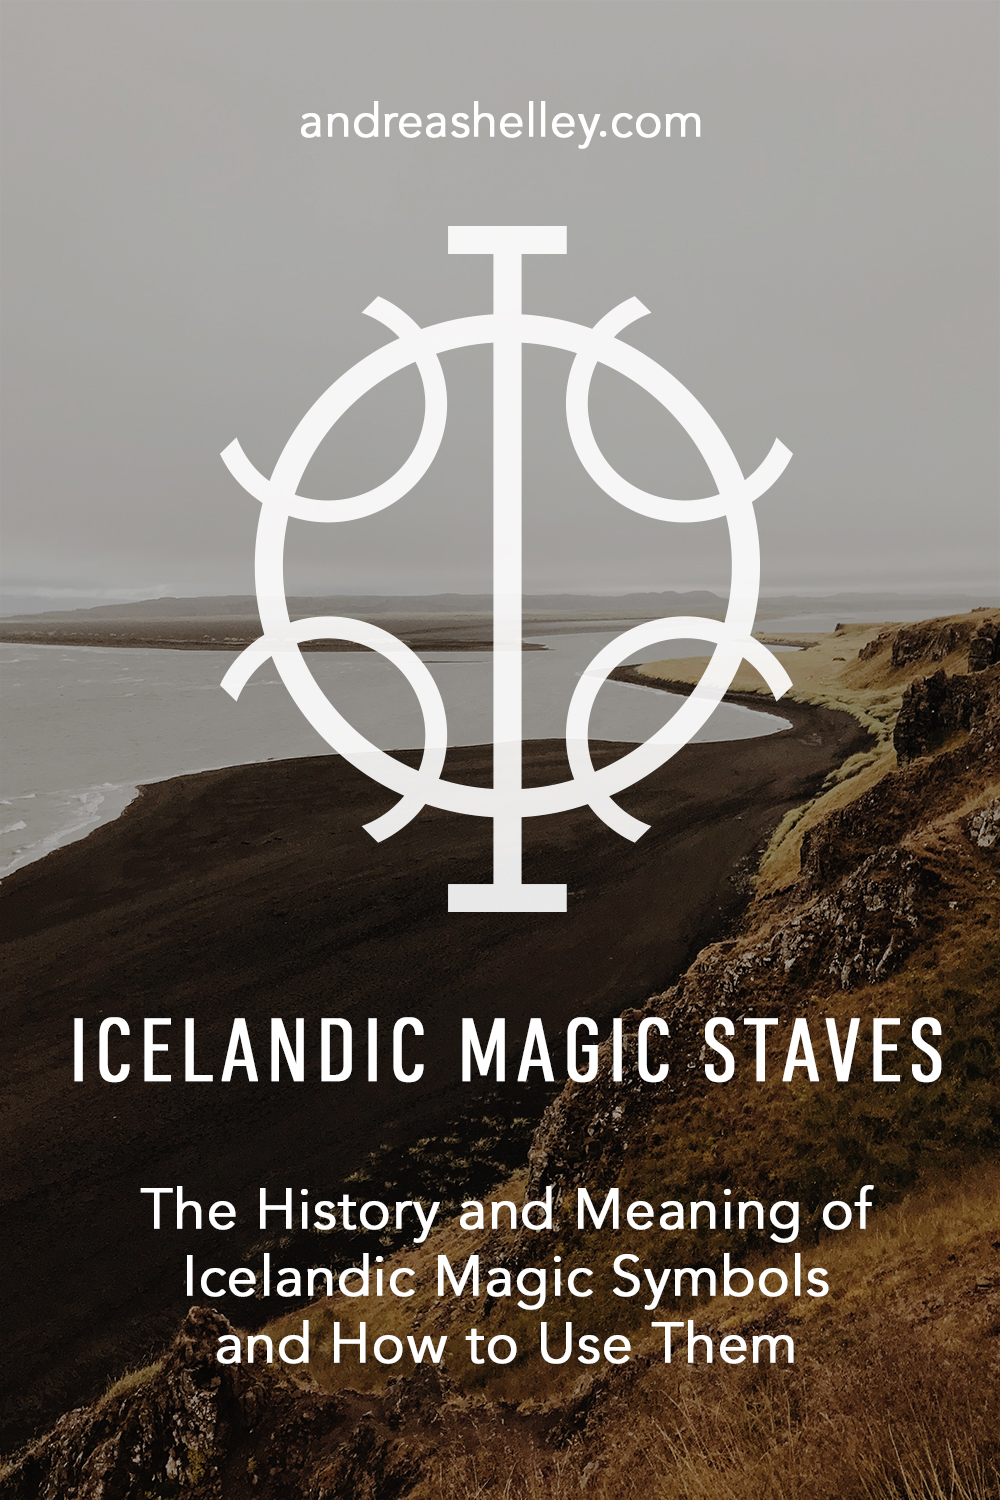 Icelandic Magic Staves: History, meaning, and how to use them.